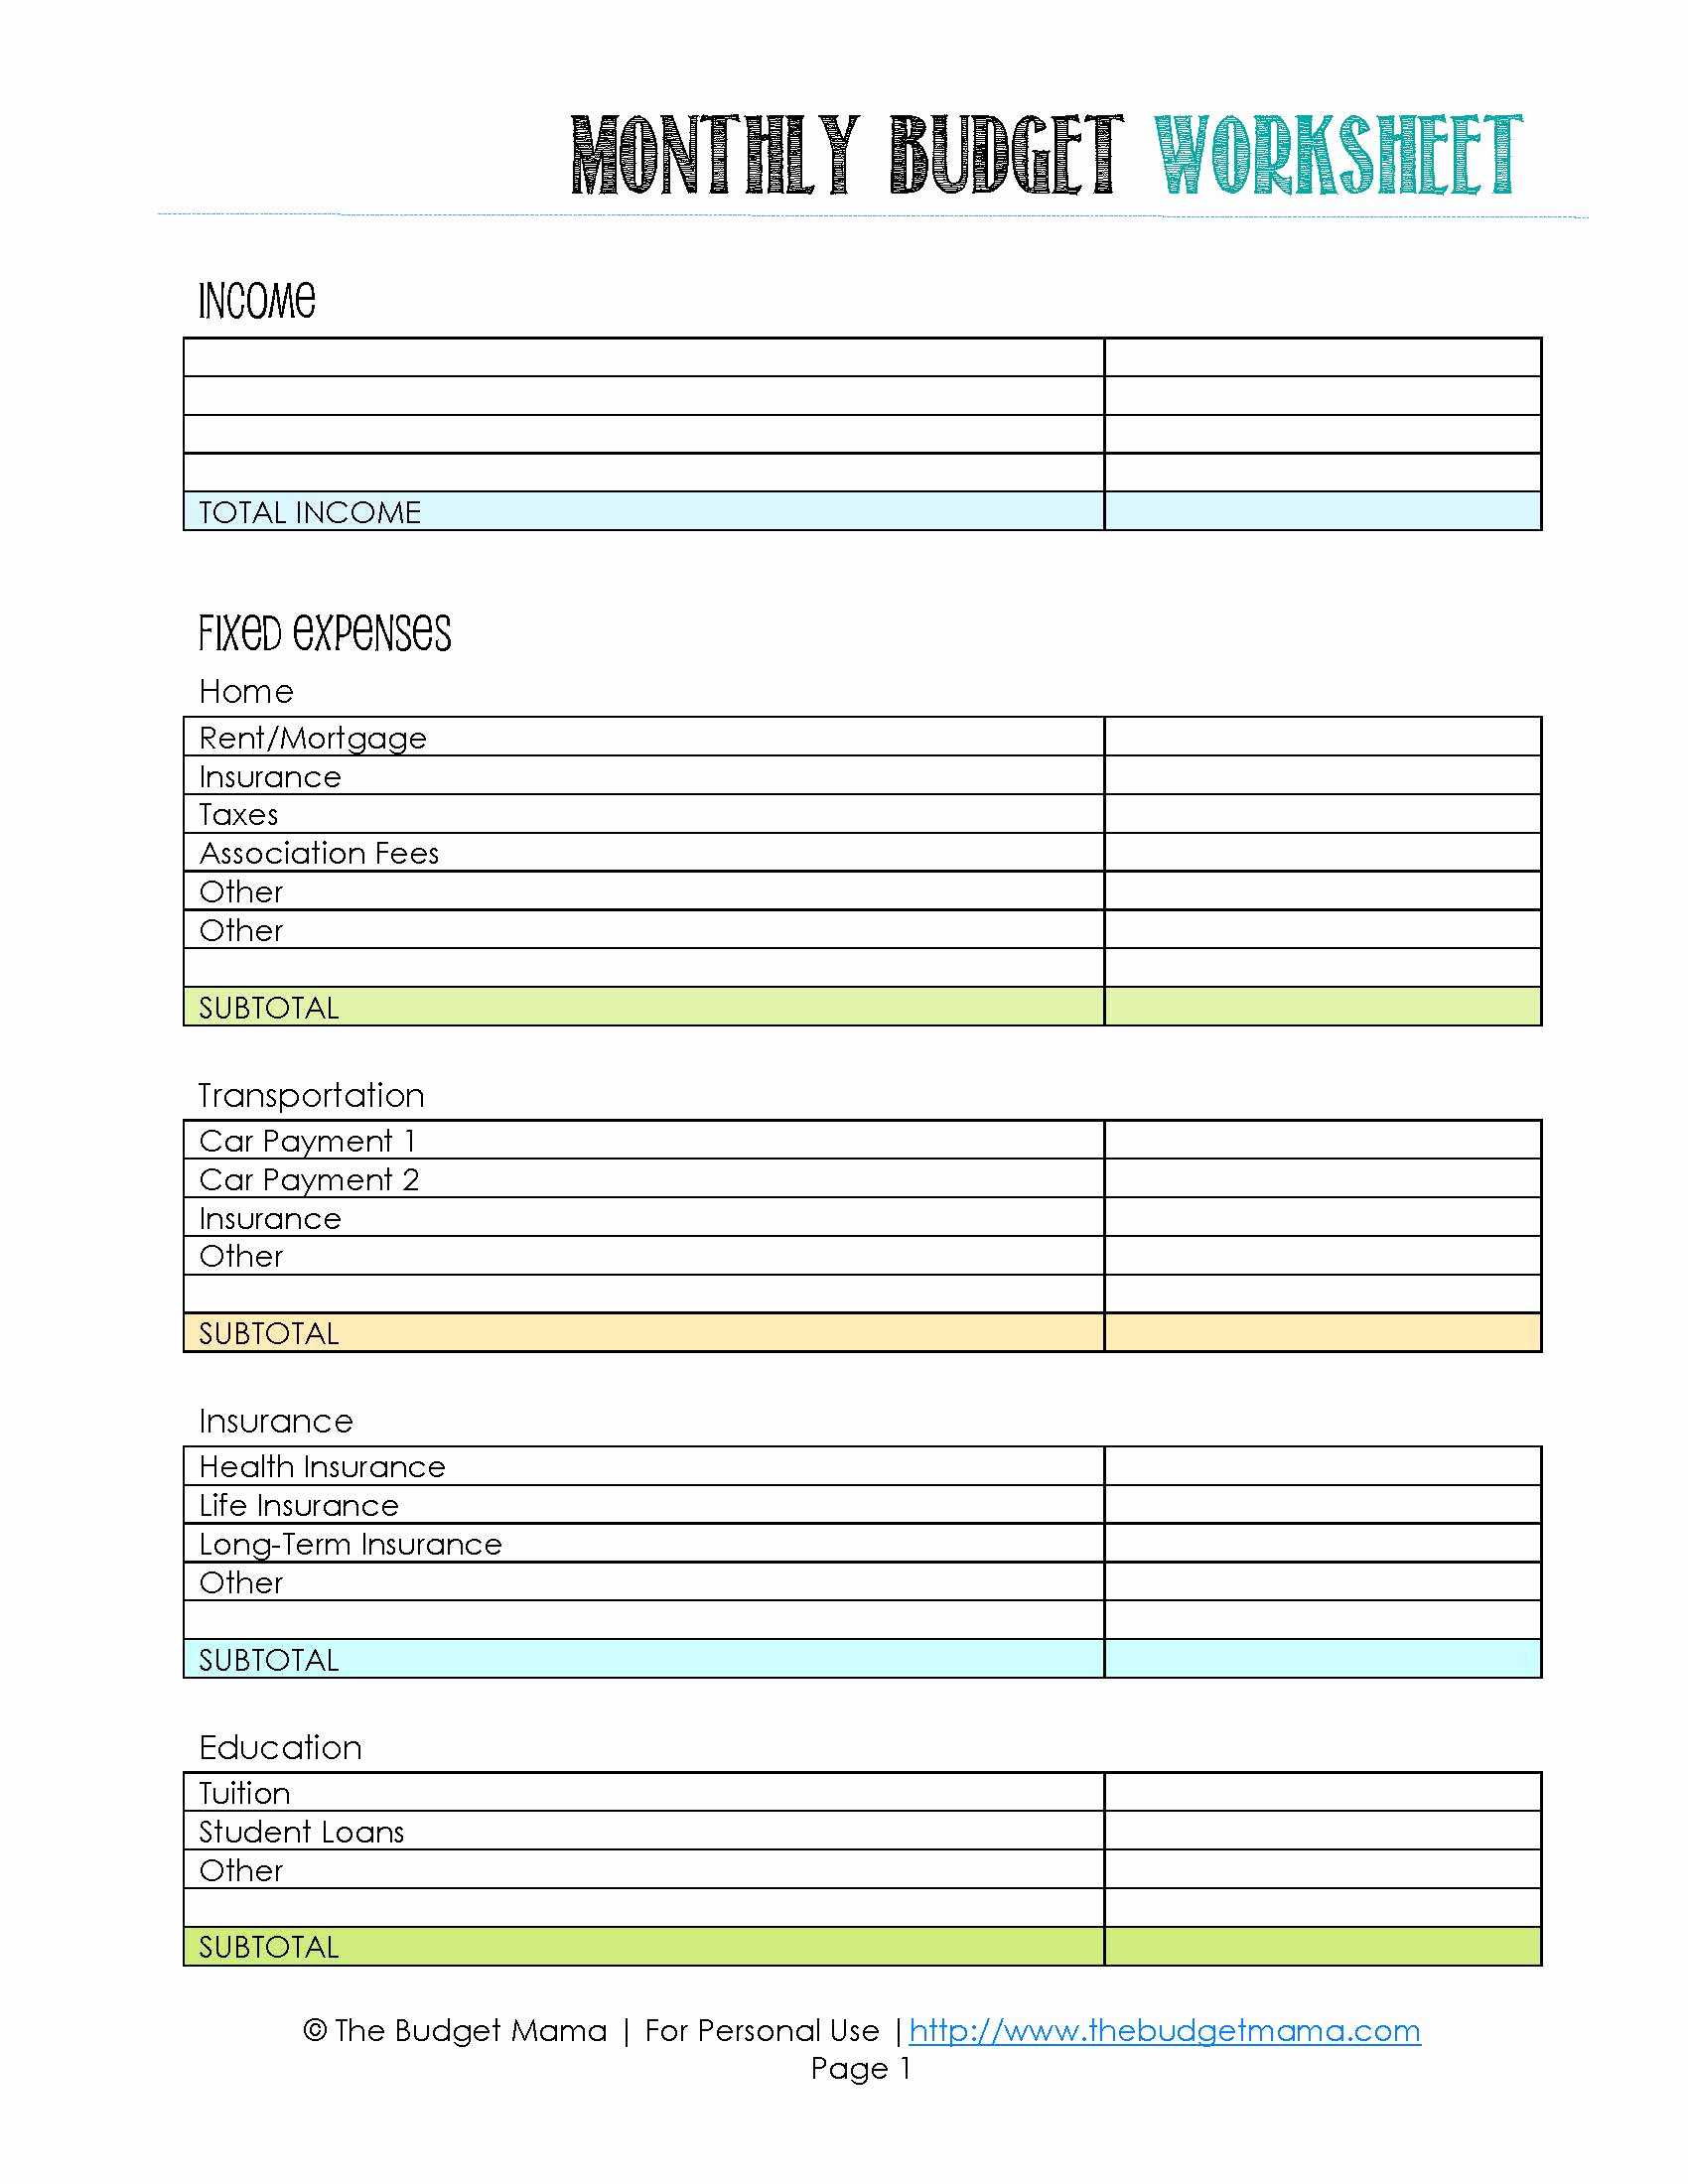 Income Calculation Worksheet for Mortgage as Well as Investment Property Spreadsheet for Simple Personal Bud Spreadsheet